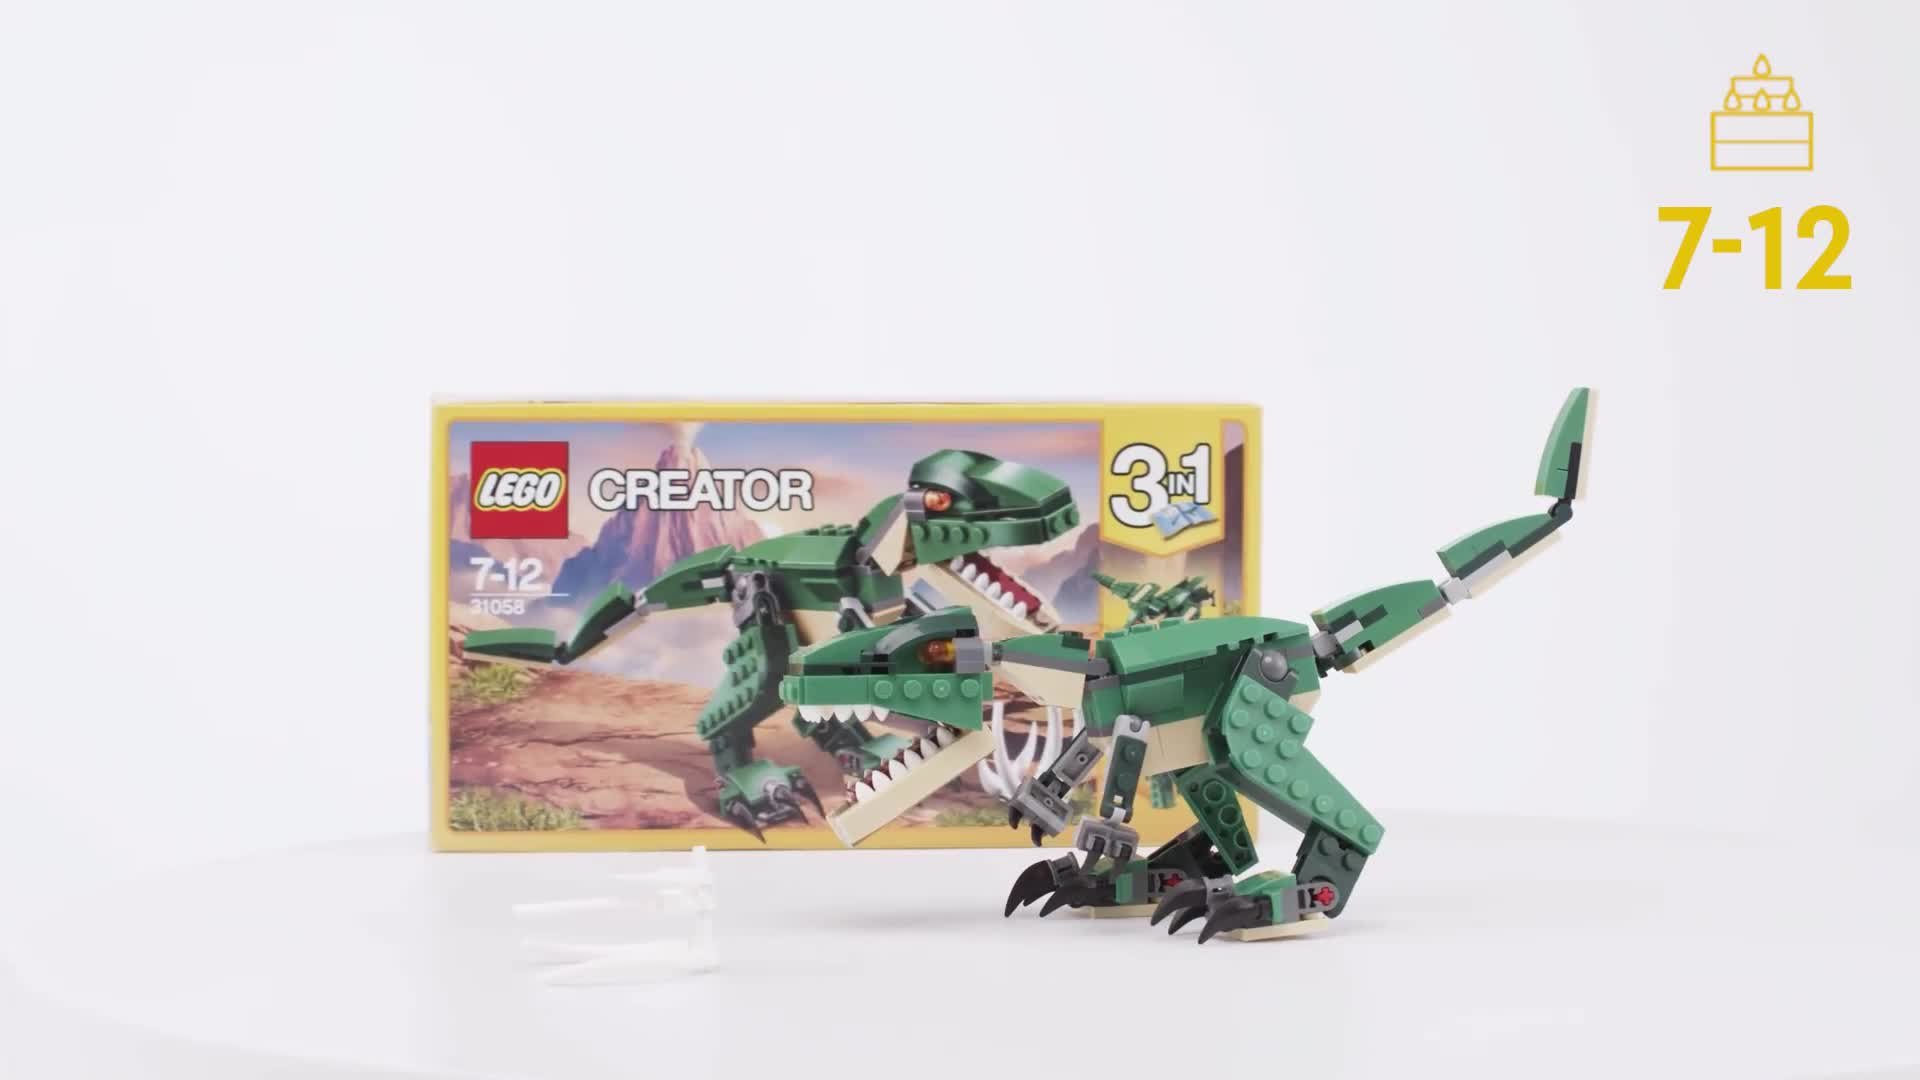 Lego 31058 Creator Mighty Dinosaurs Toy, 3 in 1 Model, Triceratops and  Pterodactyl Dinosaur Figures, Modular Building System